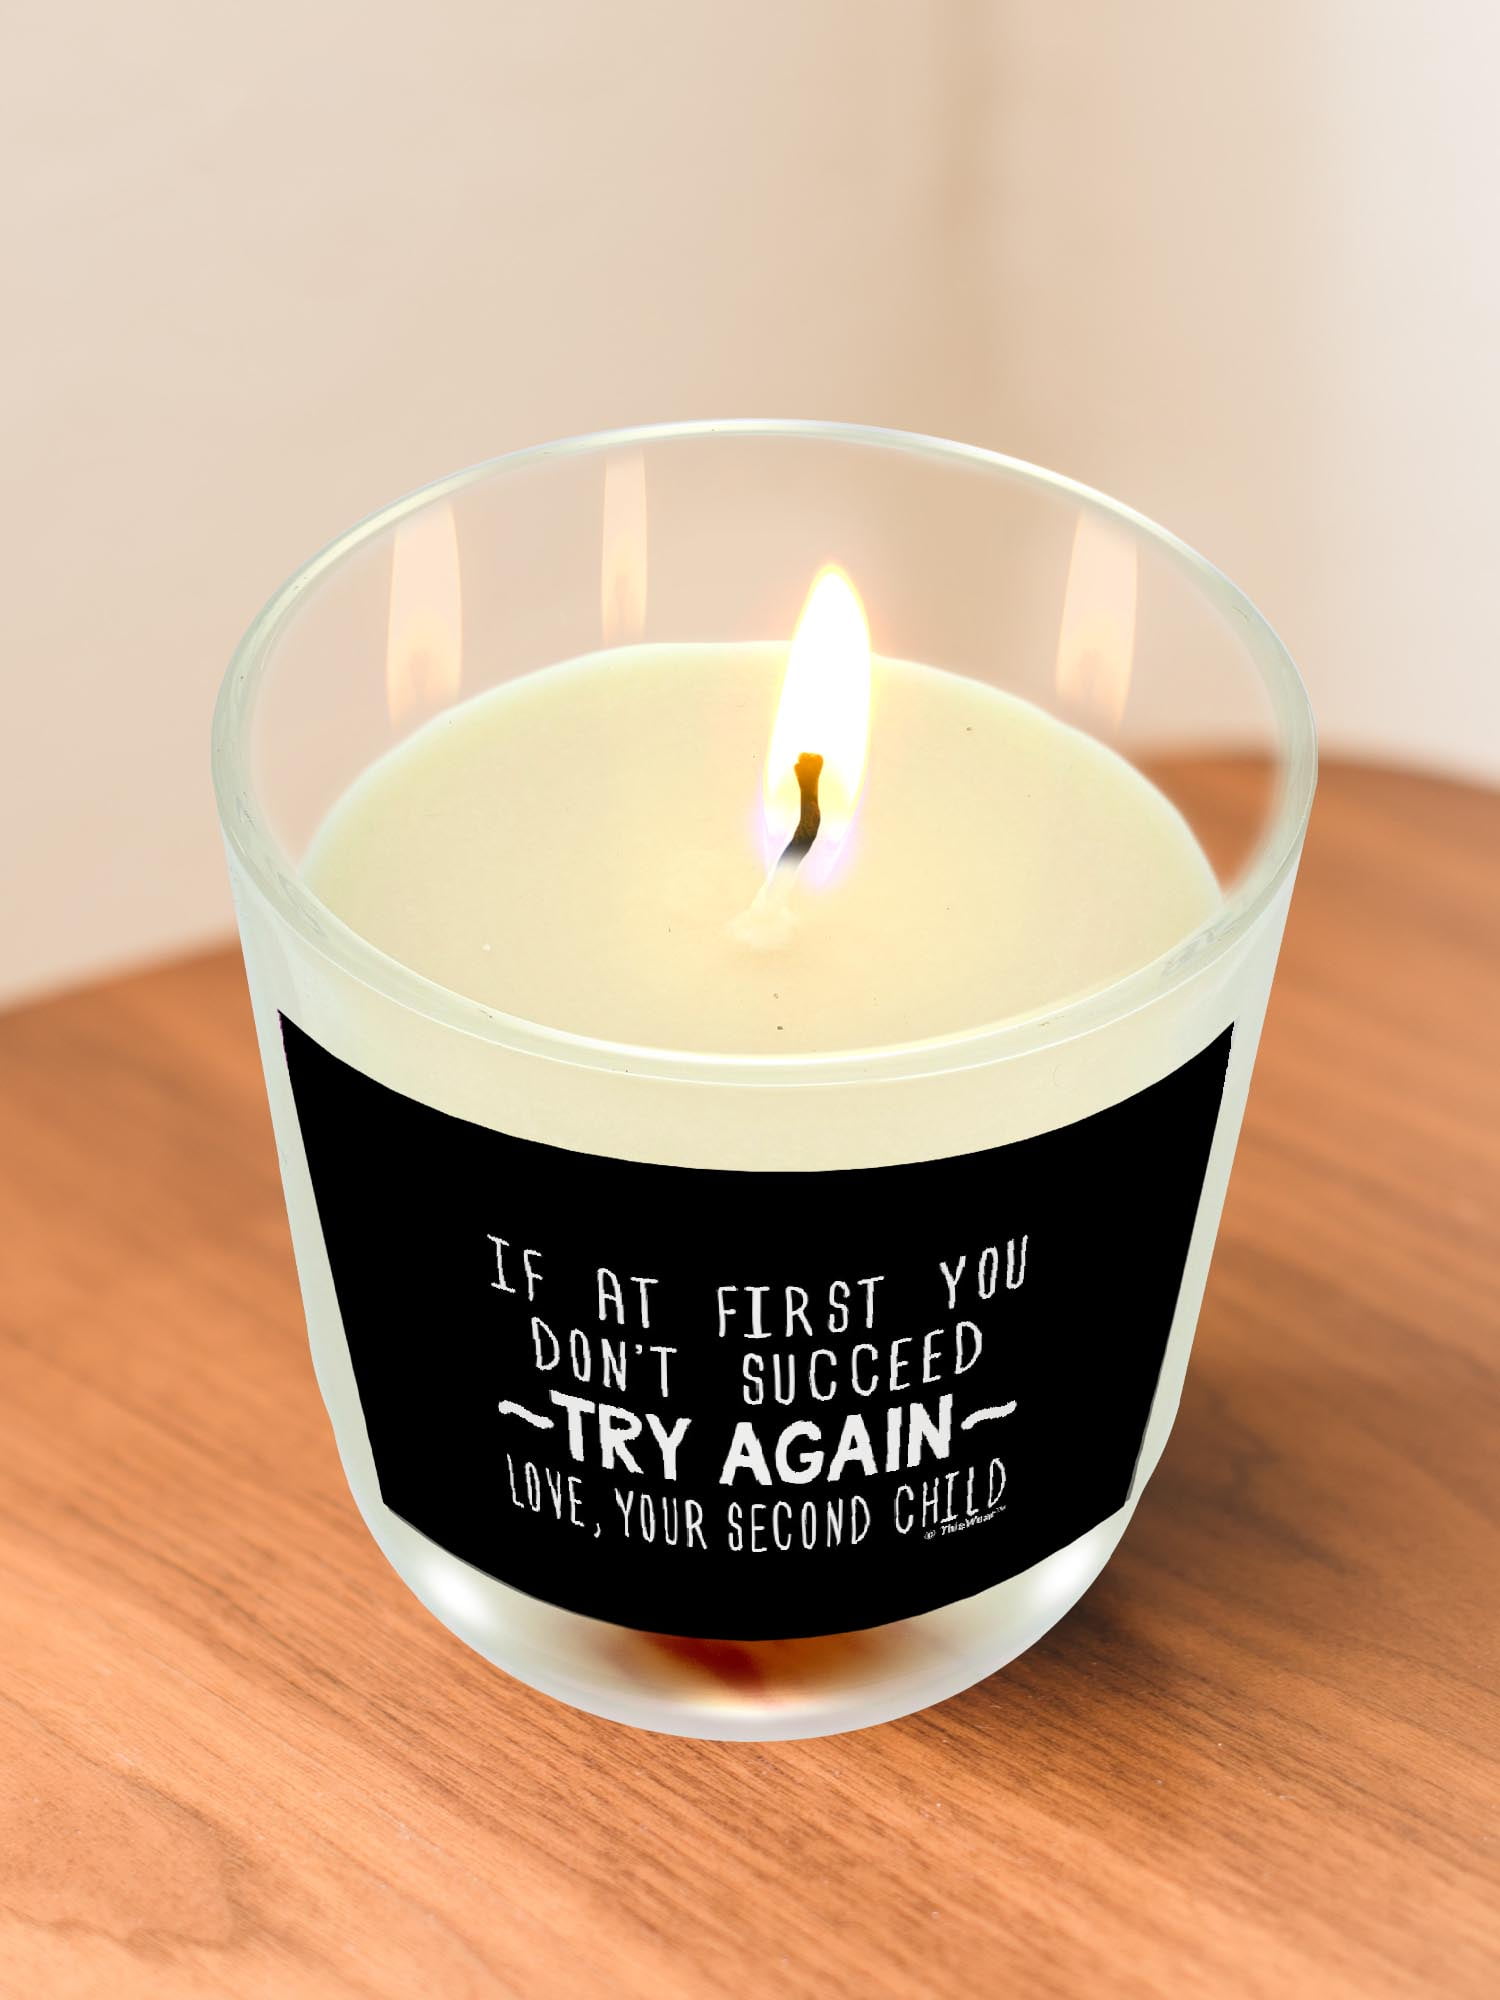 Mom's Day Candles – THE BURNING WIC